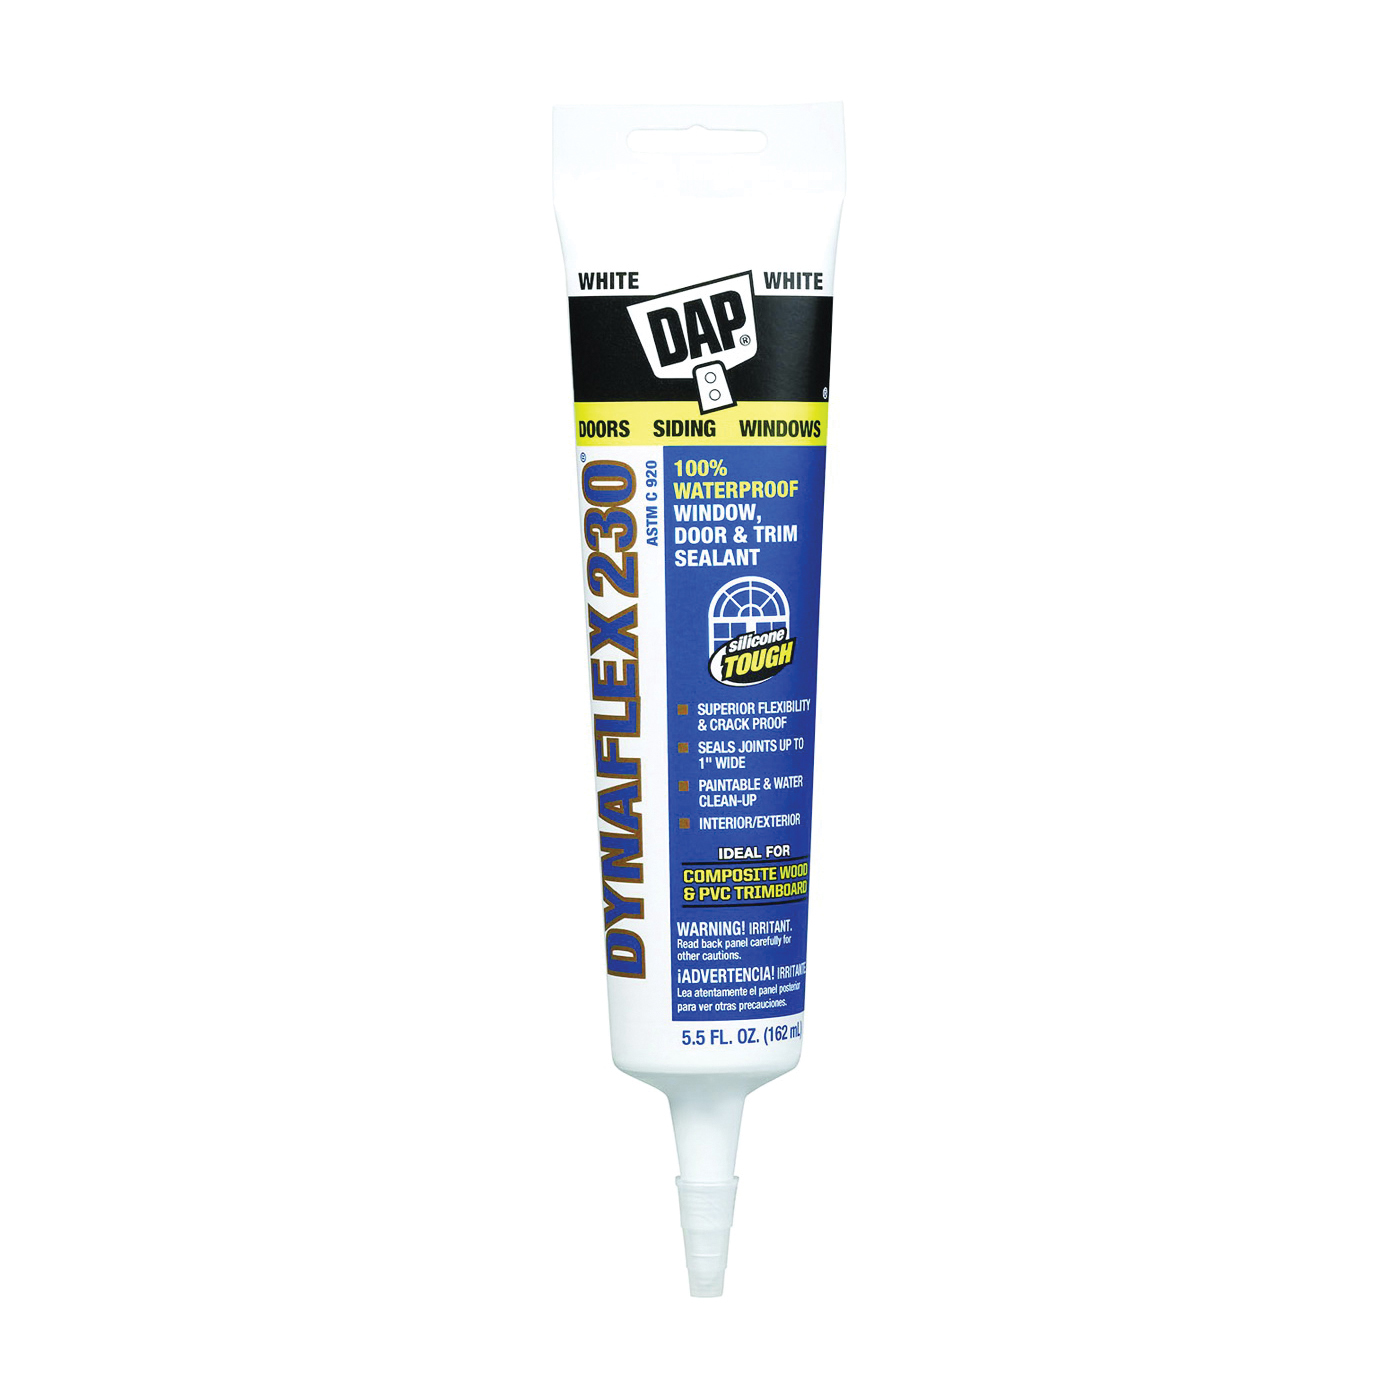 18860 Premium Sealant, Clear, 1 day Curing, 40 to 100 deg F, 5.5 oz Squeeze Tube